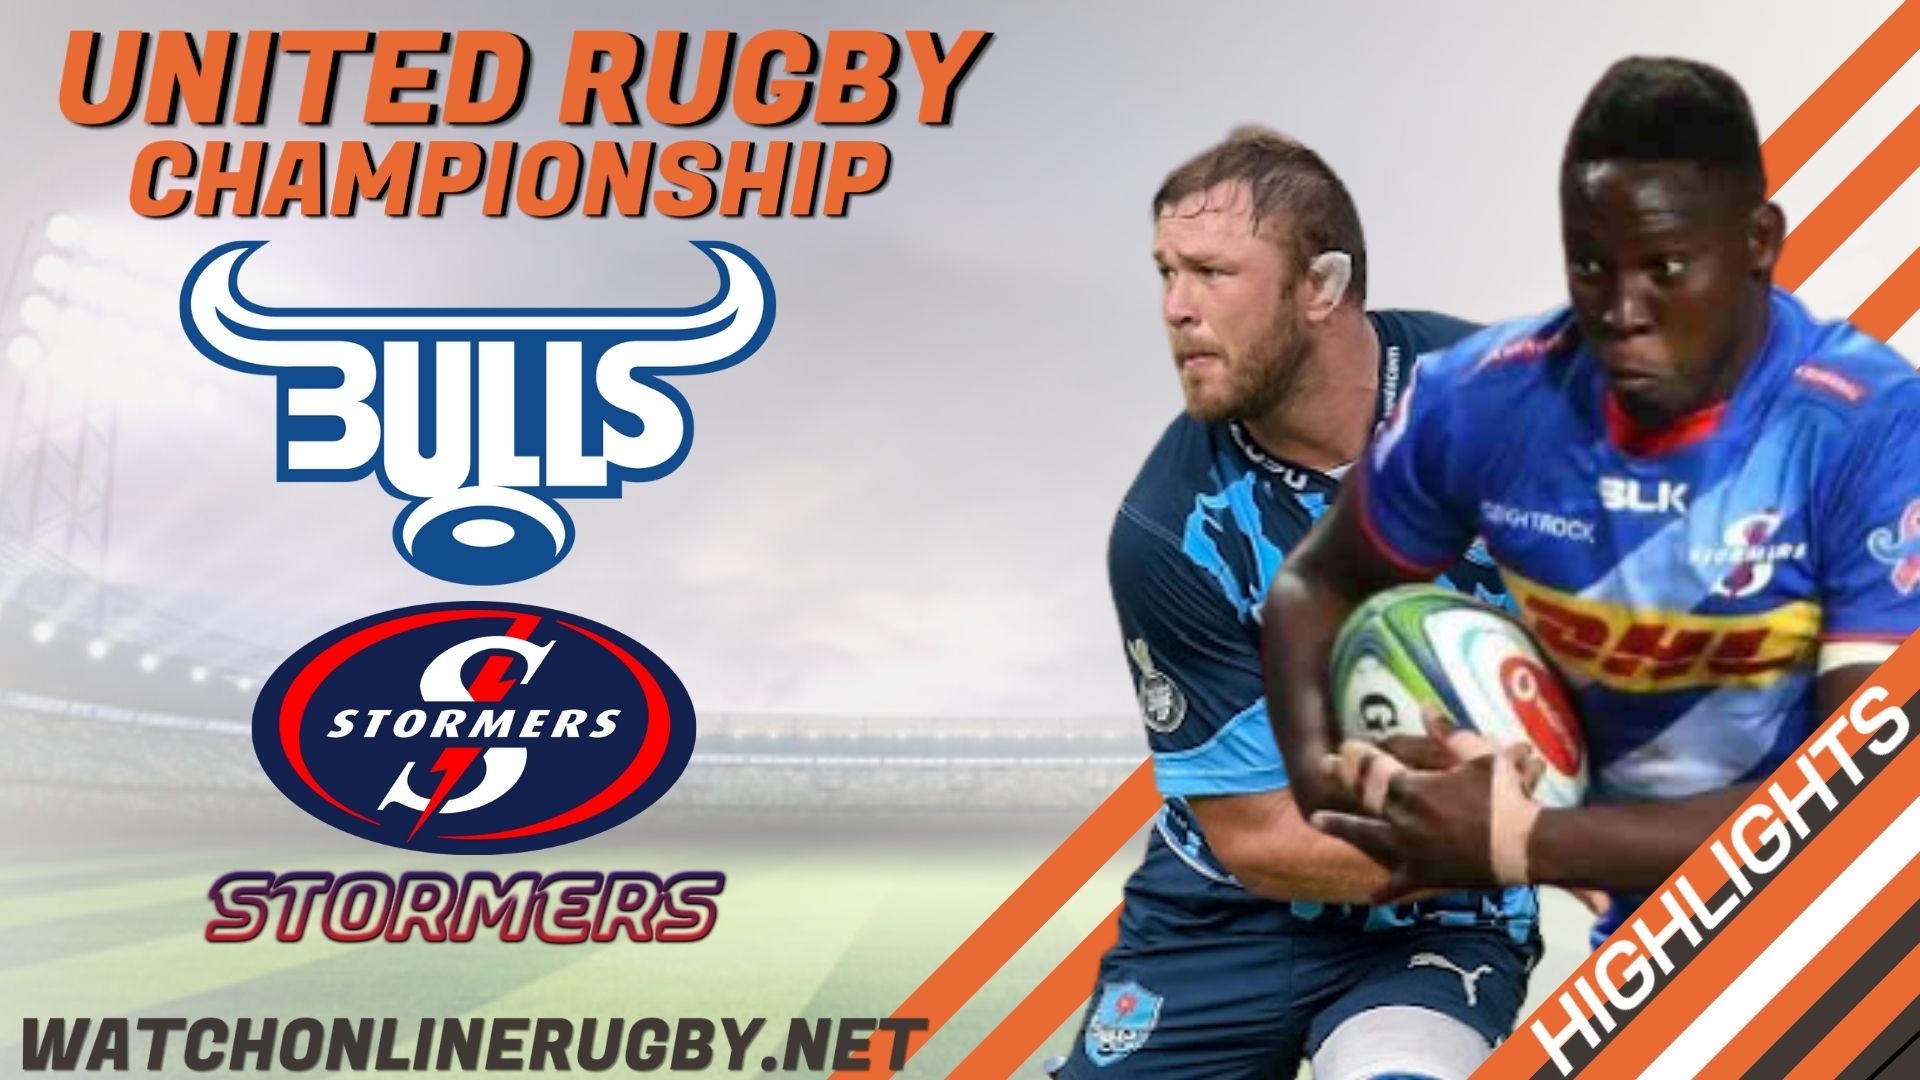 Bulls Vs Stormers United Rugby Championship 2022 RD 10